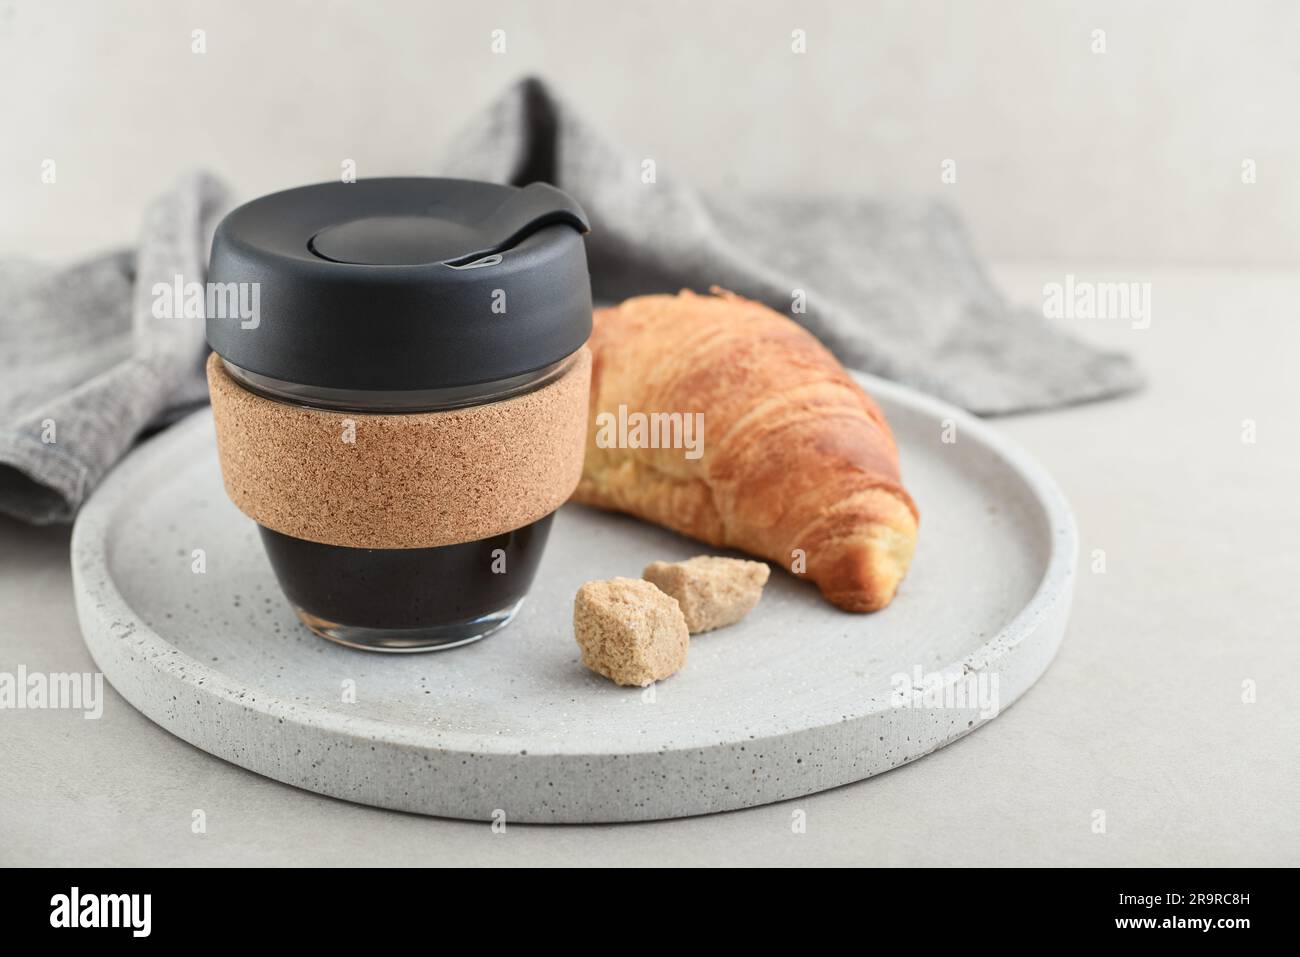 https://c8.alamy.com/comp/2R9RC8H/coffee-to-go-in-reusable-travel-mug-made-from-glass-and-cork-band-with-croissant-on-tray-zero-waste-sustainable-lifestyle-concept-2R9RC8H.jpg